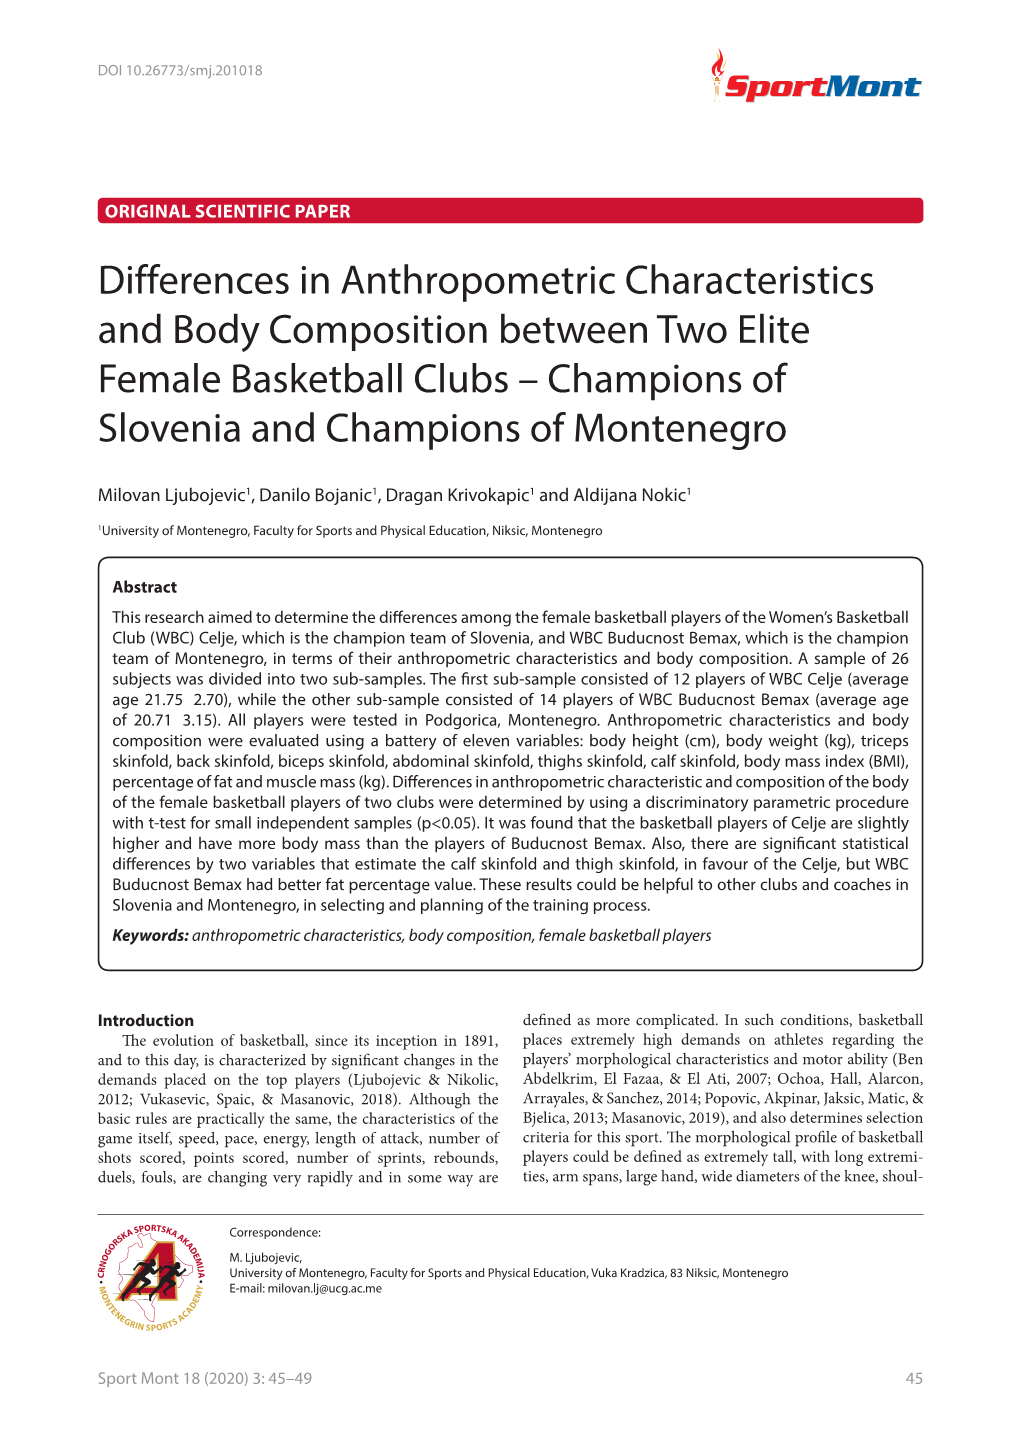 Differences in Anthropometric Characteristics and Body Composition Between Two Elite Female Basketball Clubs – Champions of Slovenia and Champions of Montenegro